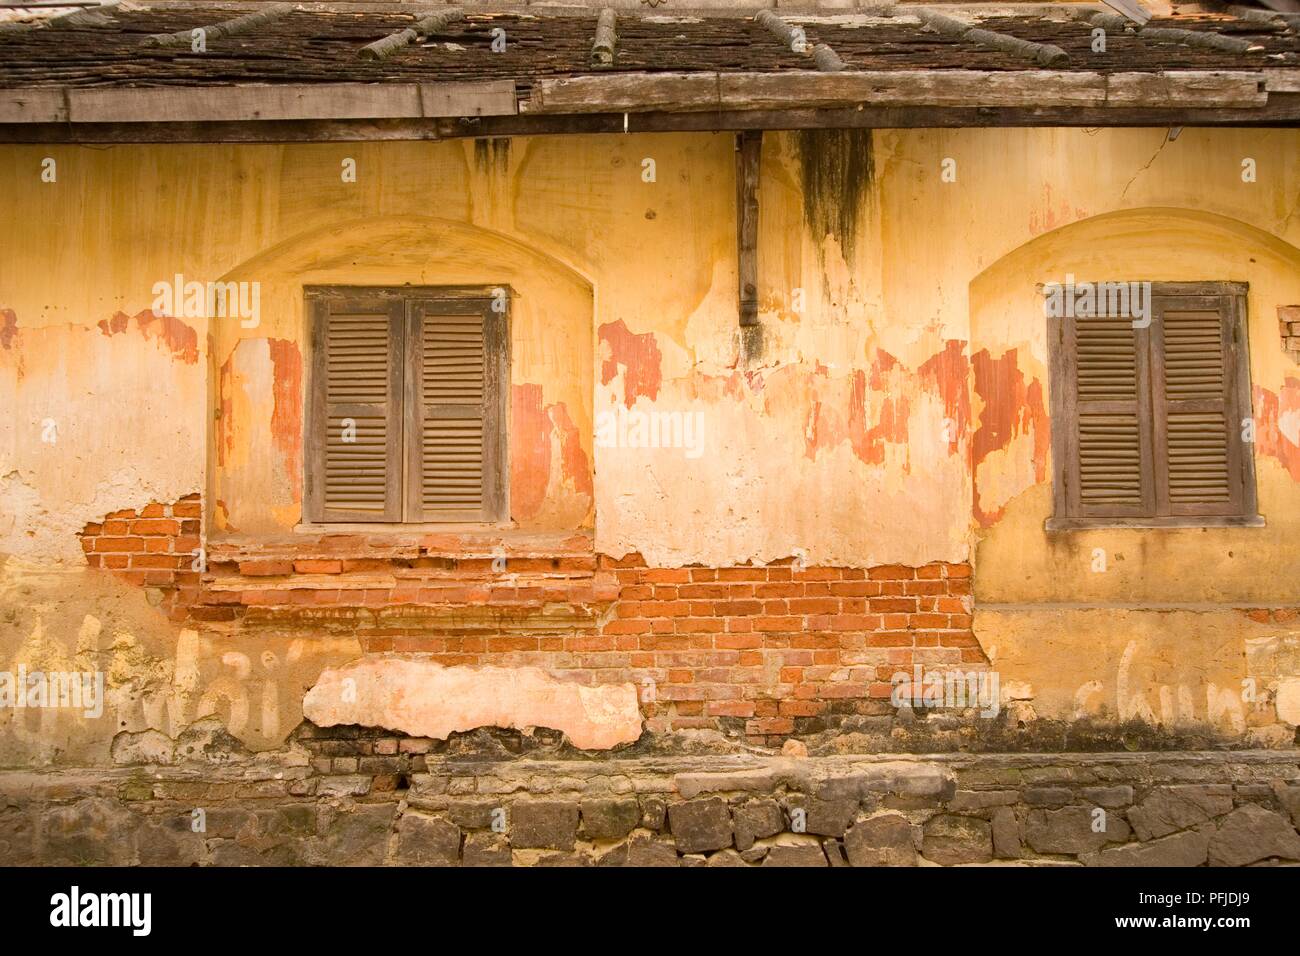 Vietnam, Hoi An, flaking plasterwork and exposed brick on exterior of building Stock Photo